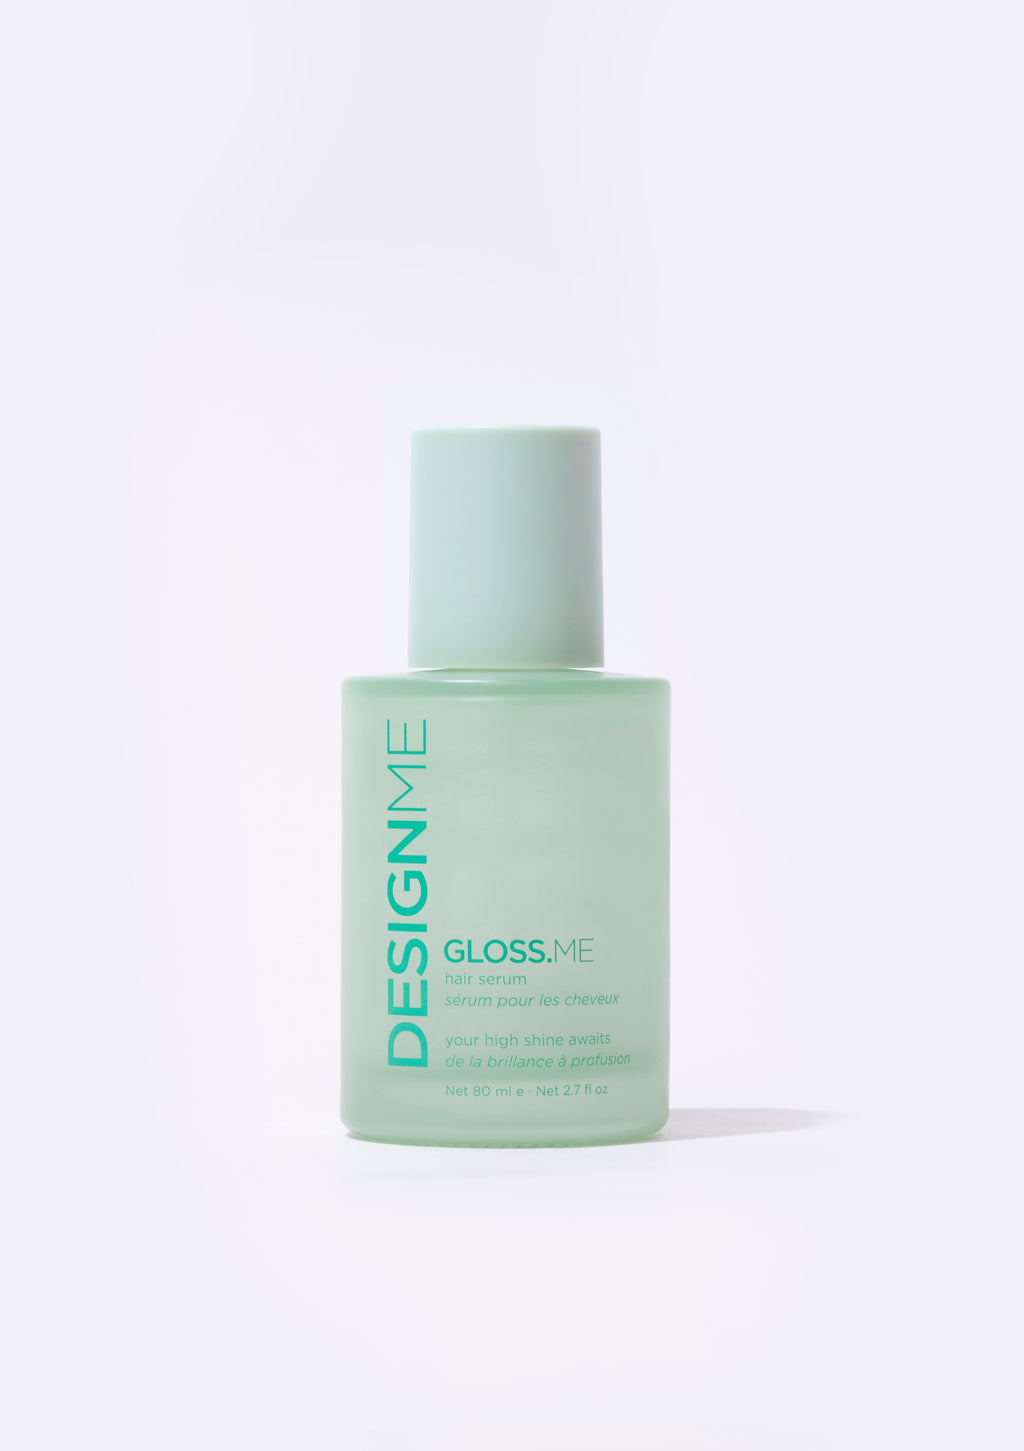 Buy designME - glossME Hydrating Duo - 300ml by Hair Care Duos at